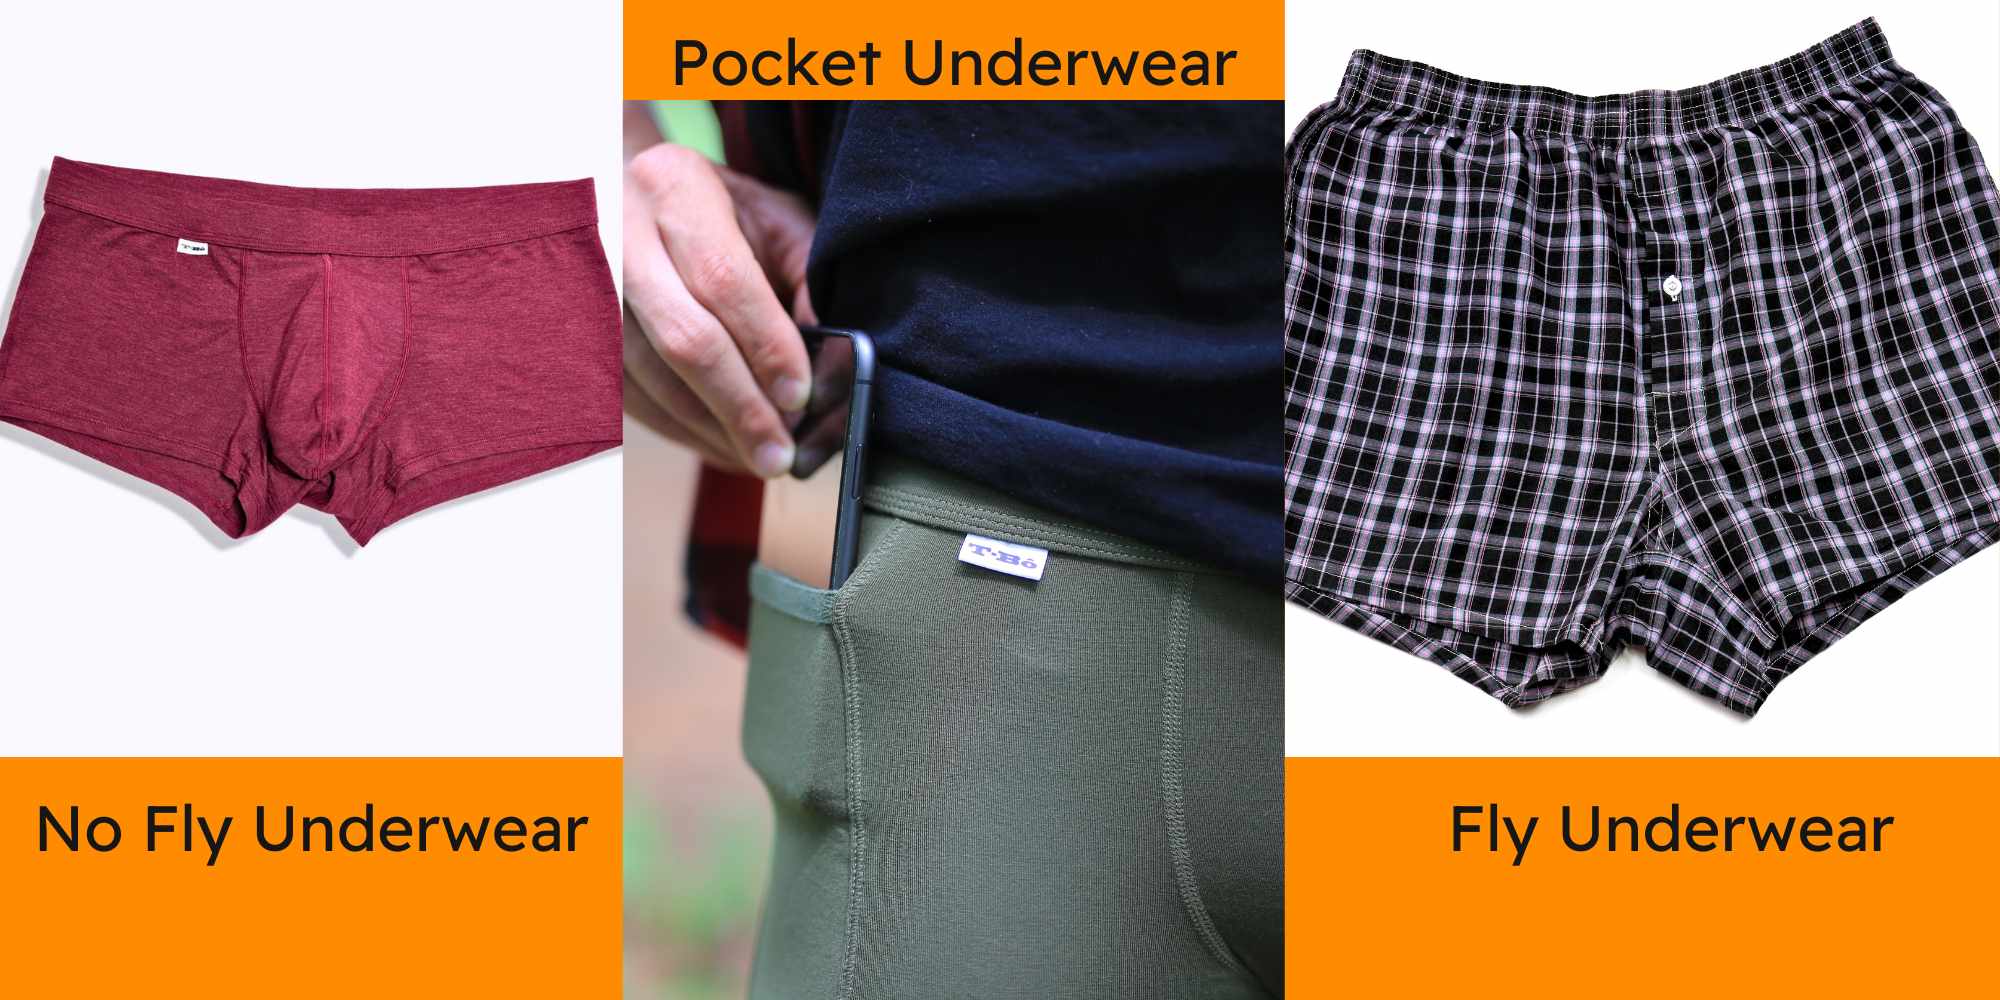 Why do Men's Underwear Have a Hole in the Front? Unveiling the Mystery